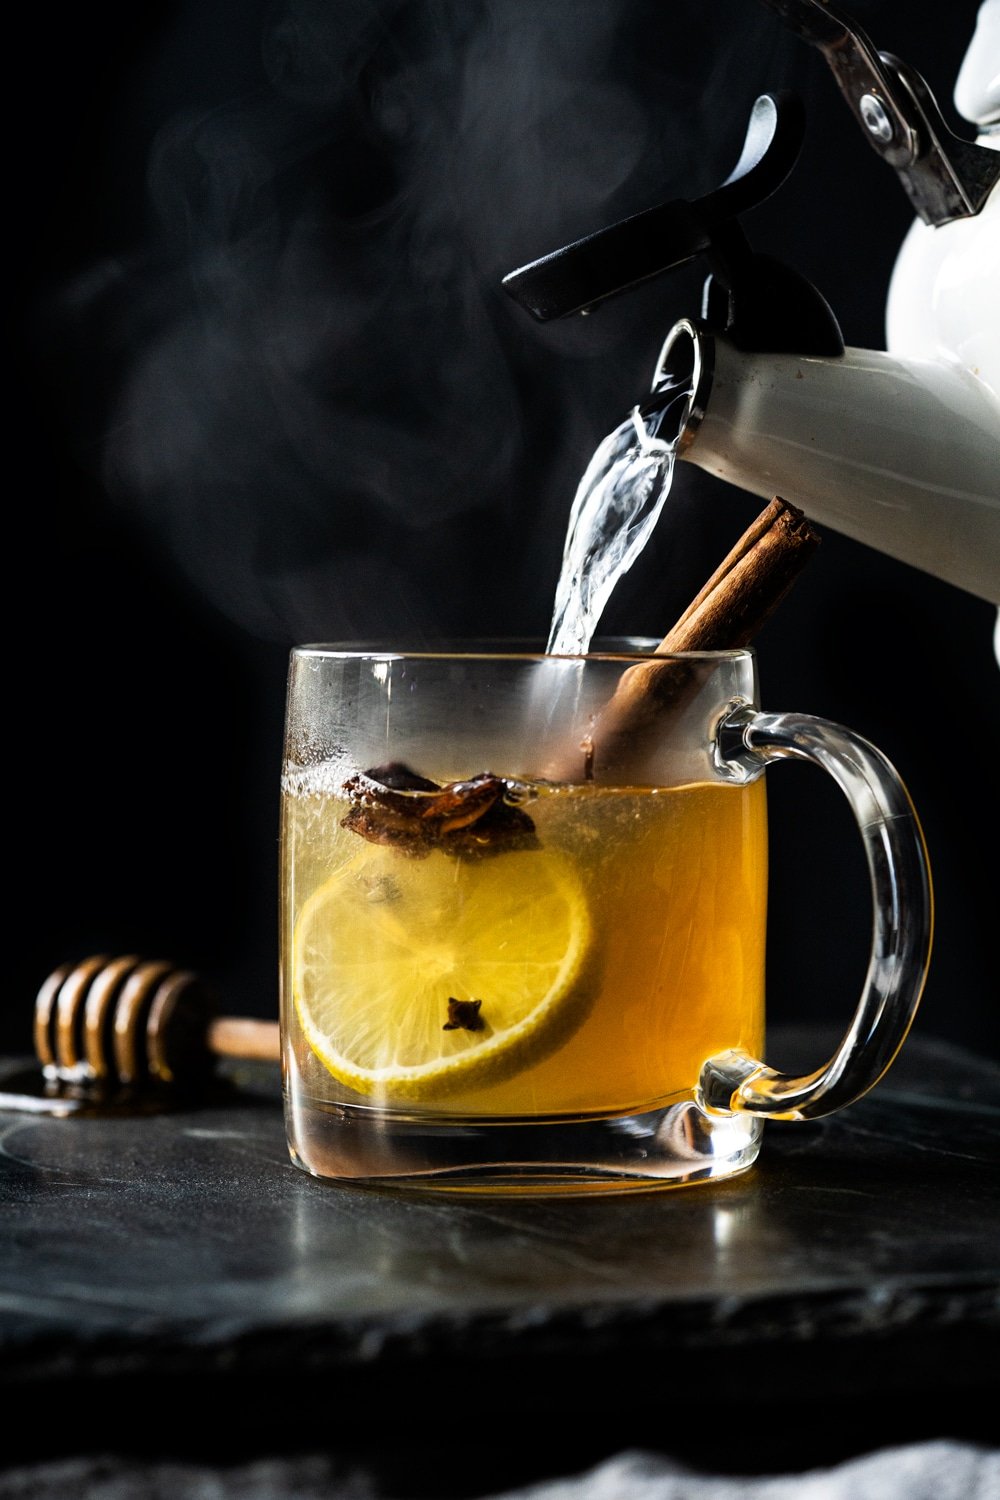 Pouring hot water into a paleo and keto hot toddy with lemon, star anise and a cinnamon stick